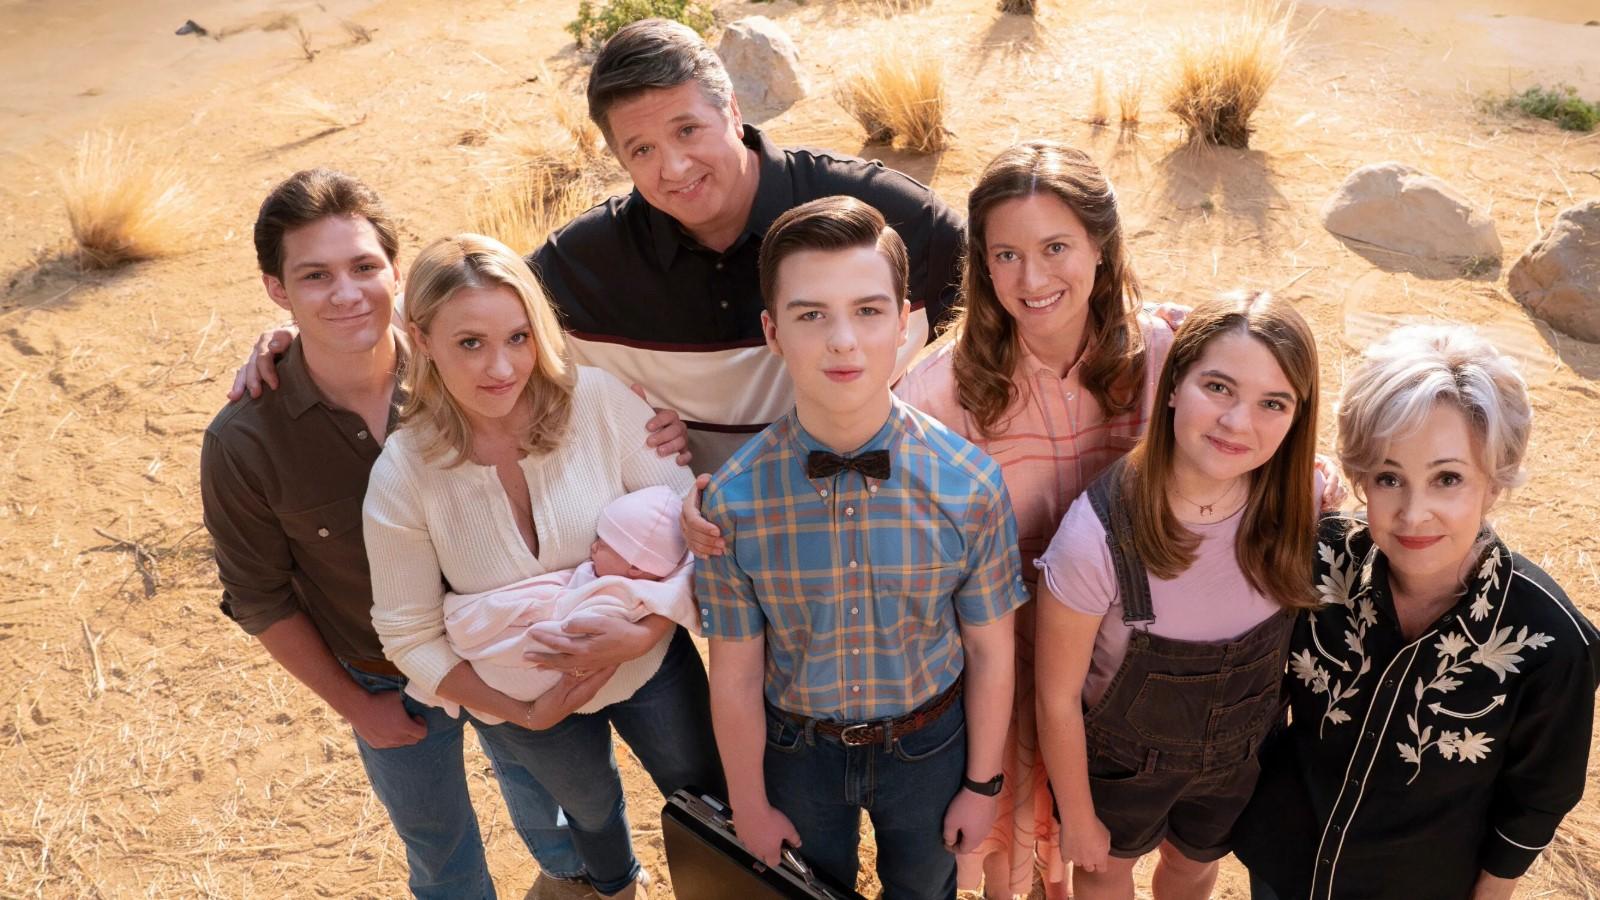 The cast of Young Sheldon